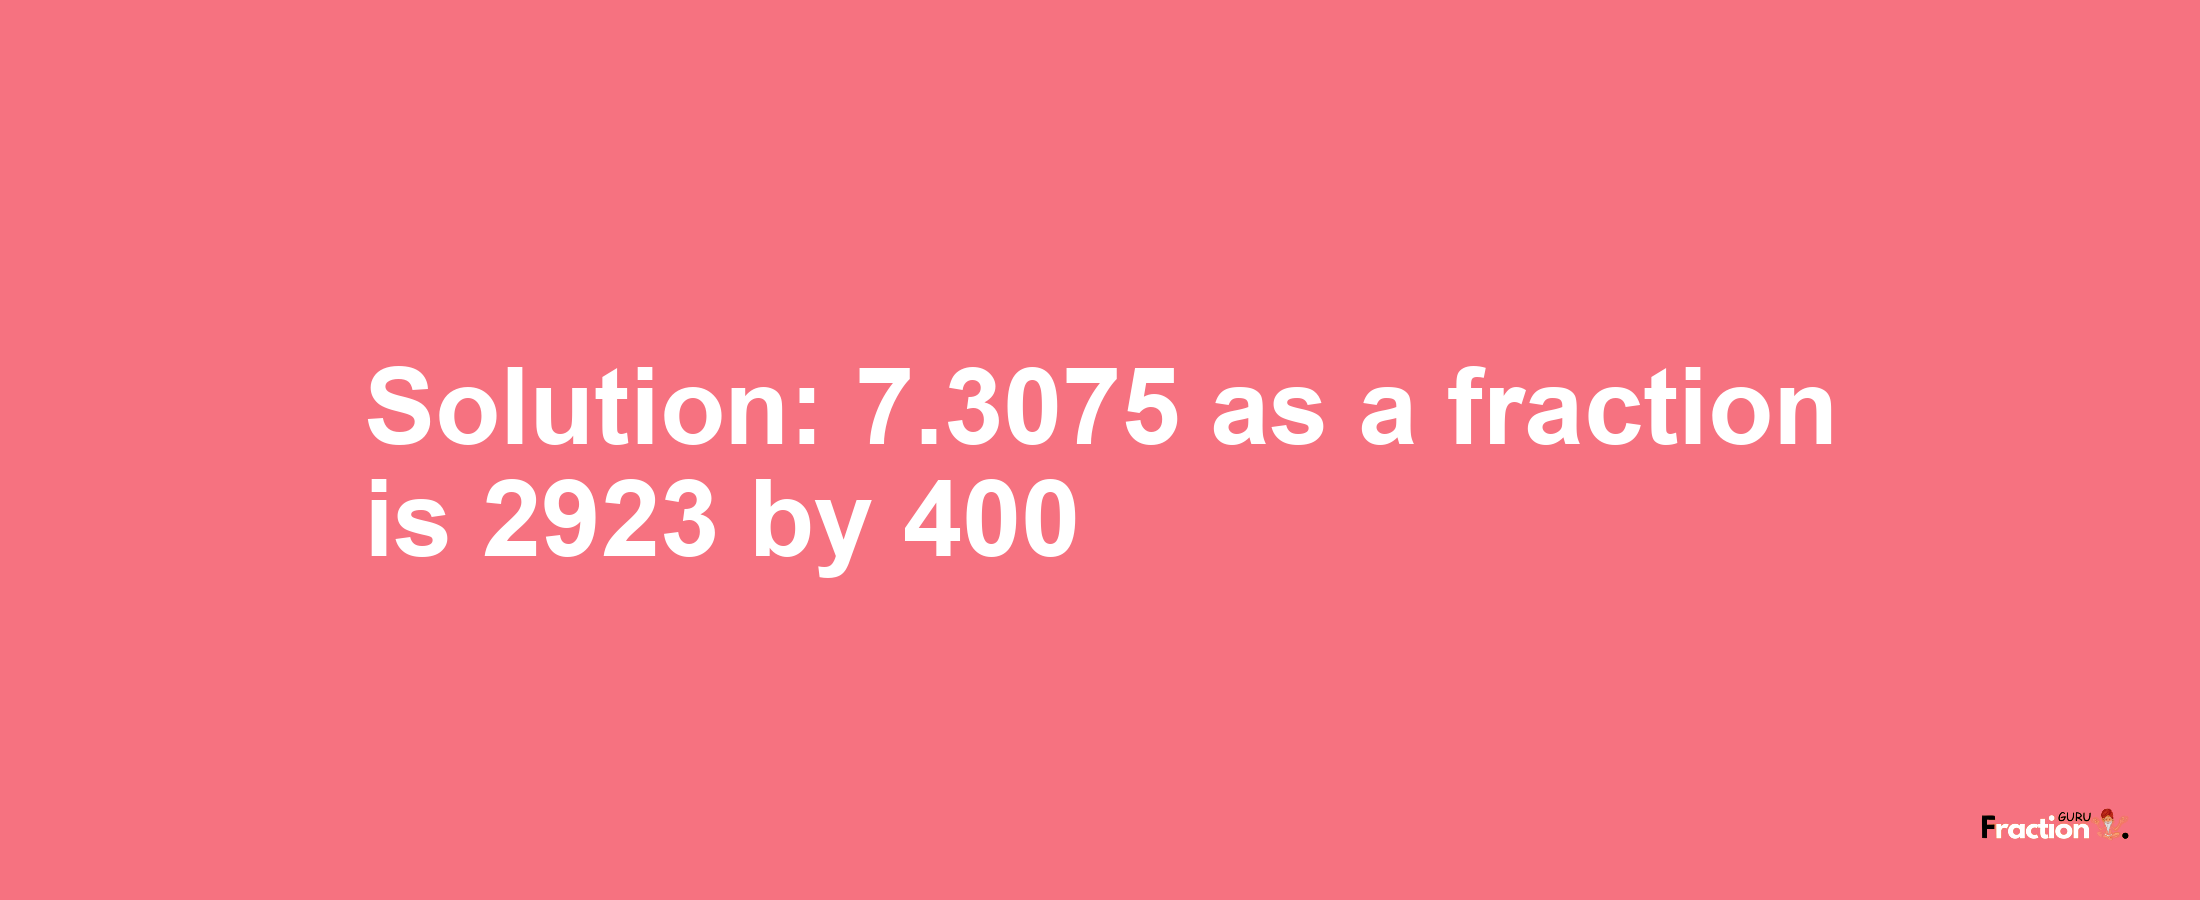 Solution:7.3075 as a fraction is 2923/400